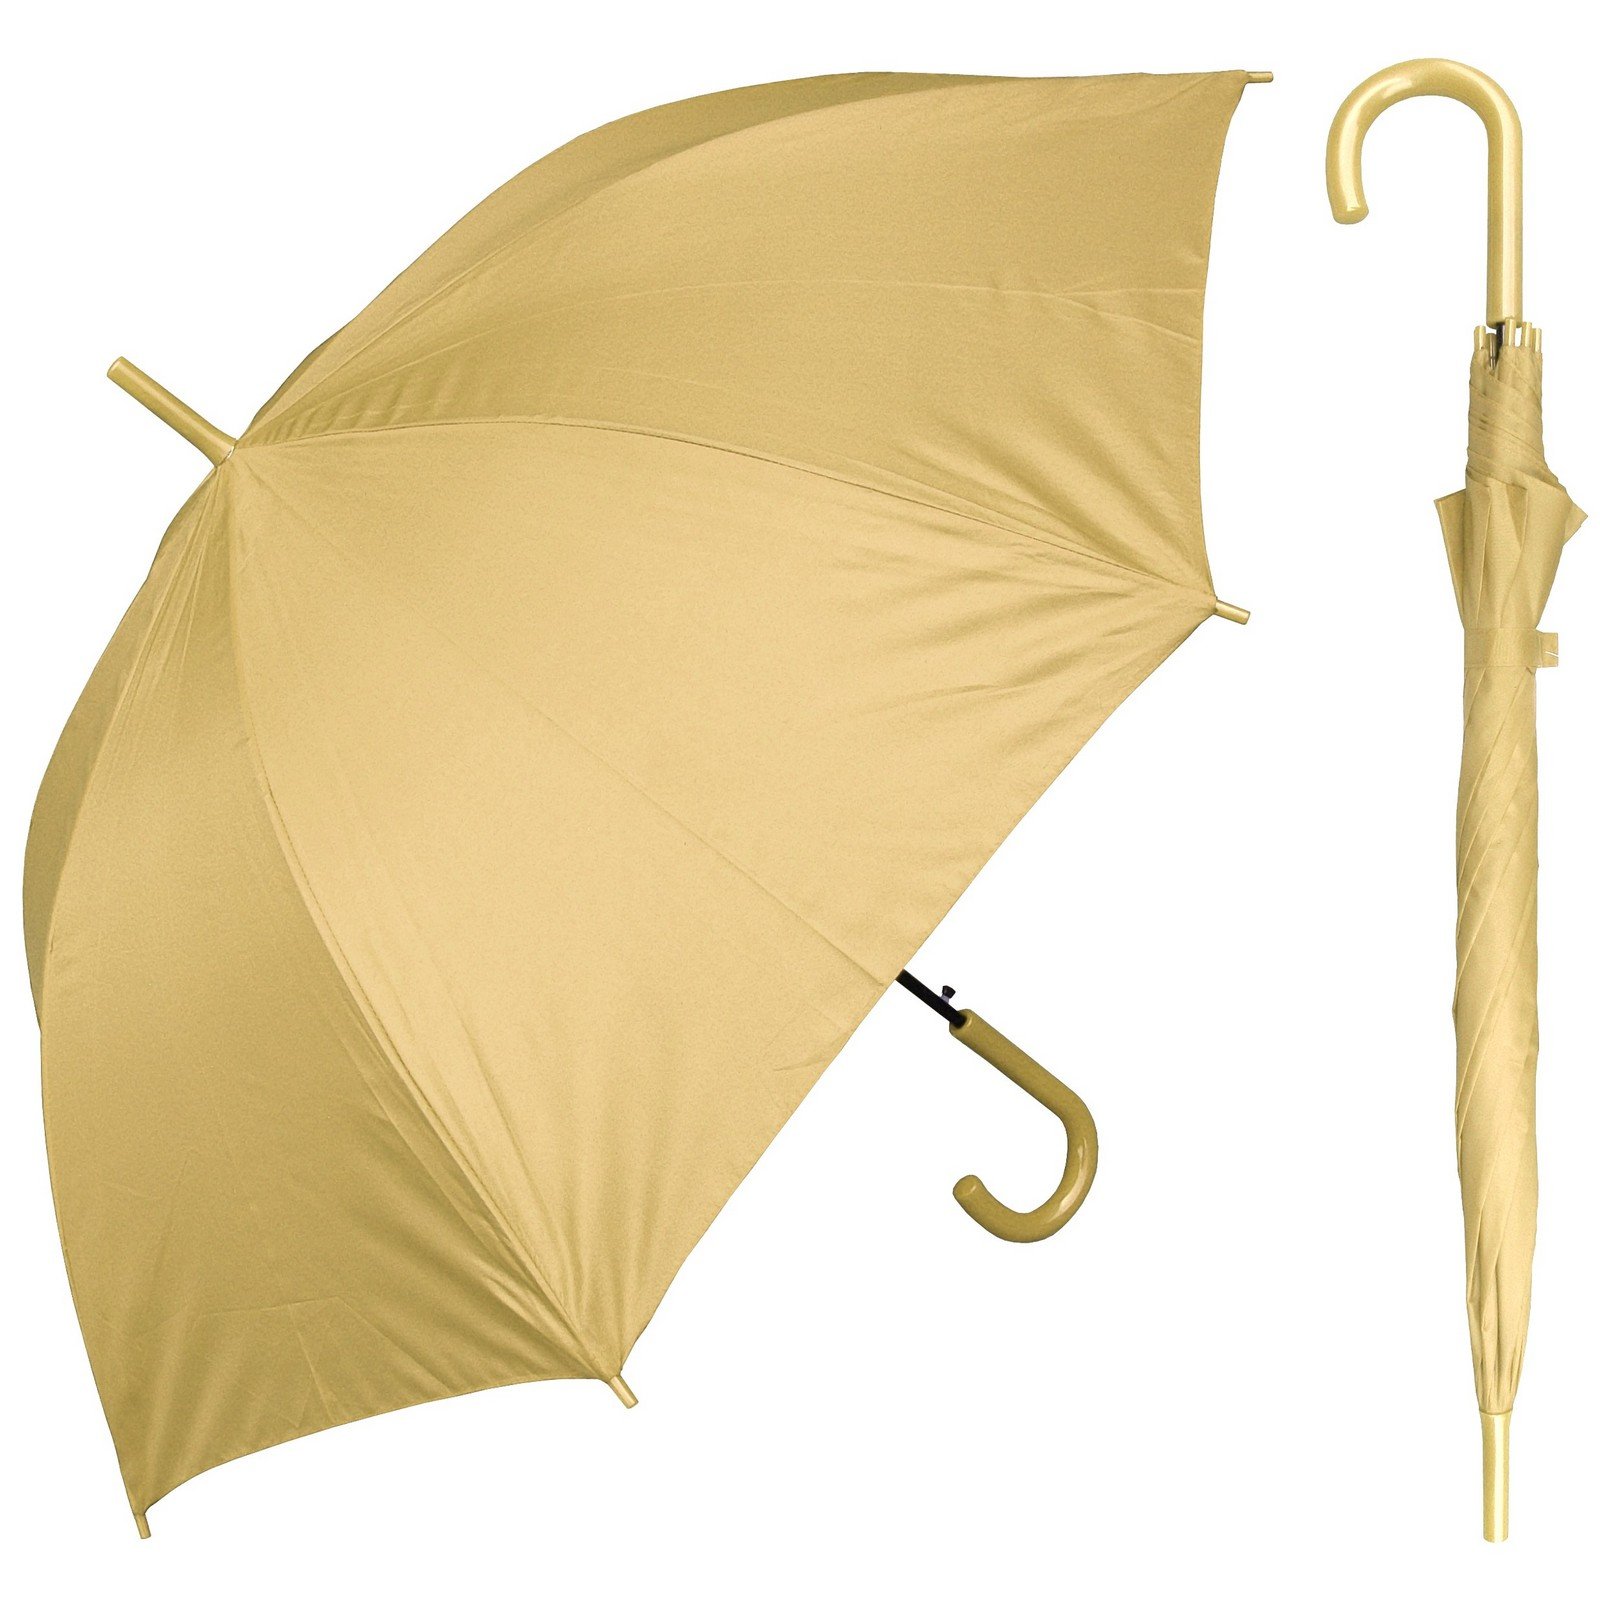 Match Color Fabric And Handle High Quality Straight Handle Chinese Umbrella Factory